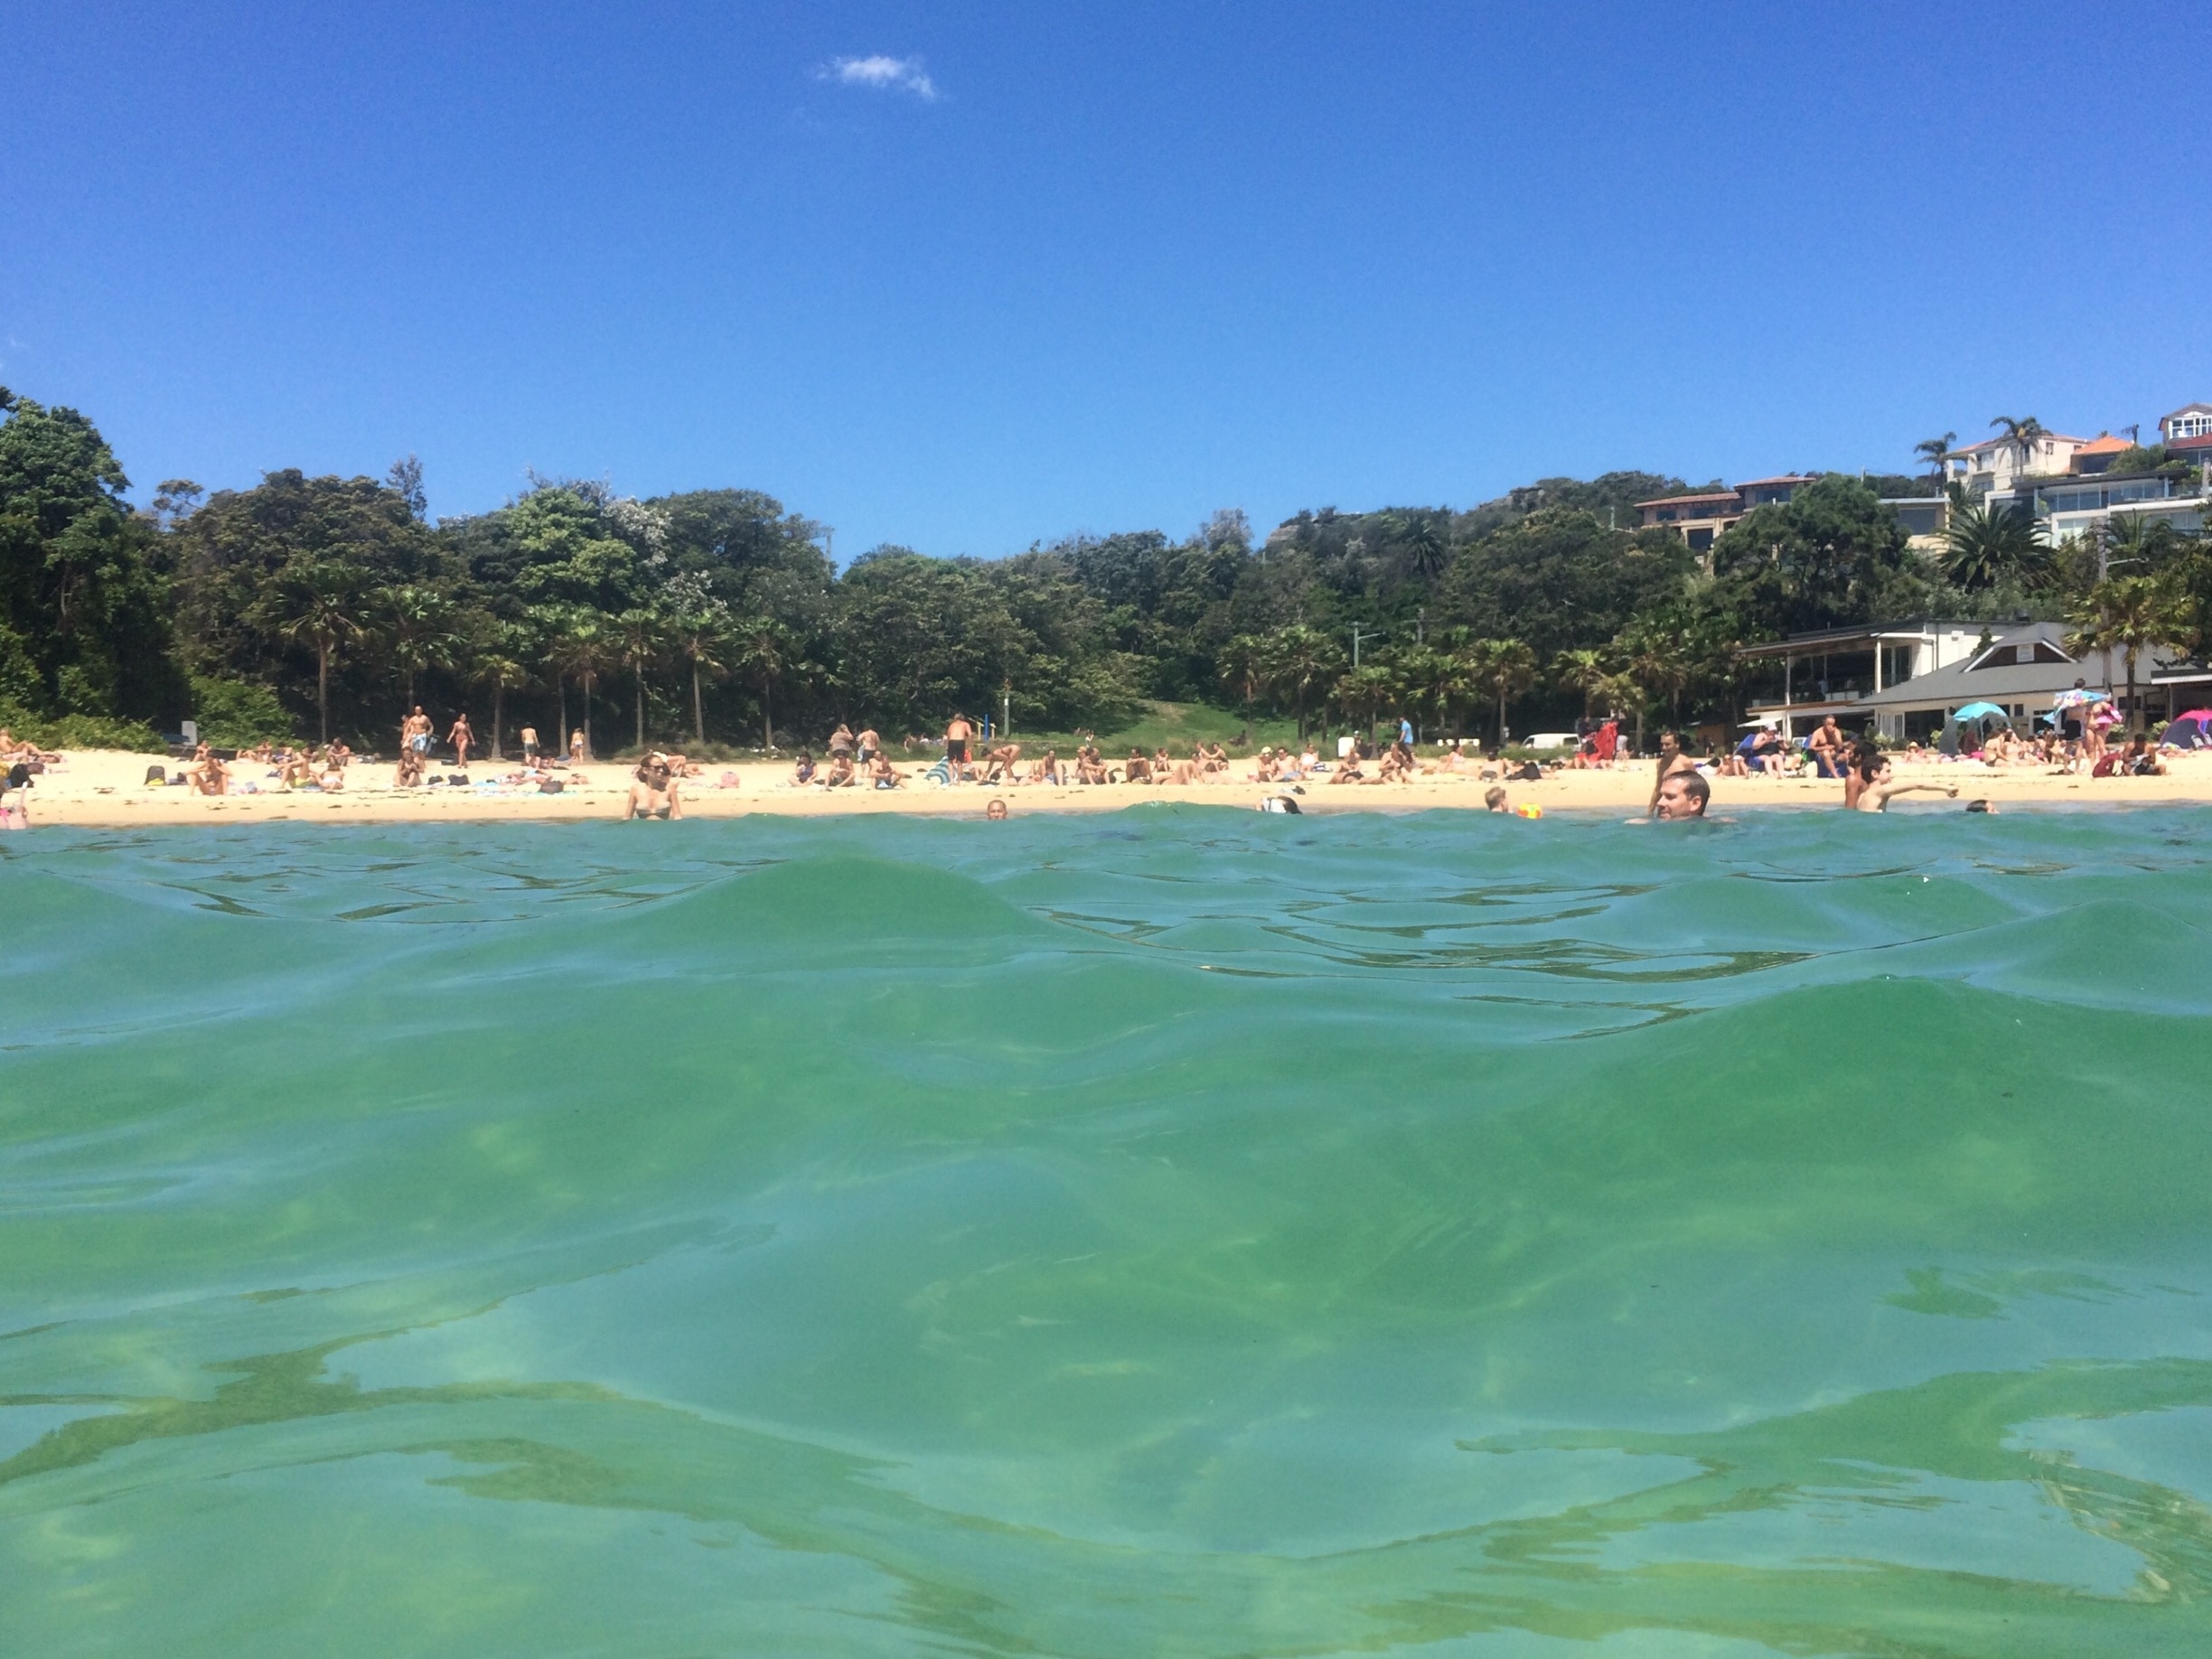 So hot yesterday in Sydney. A perfect little spot for a dip on the northern beaches #sydney #beach